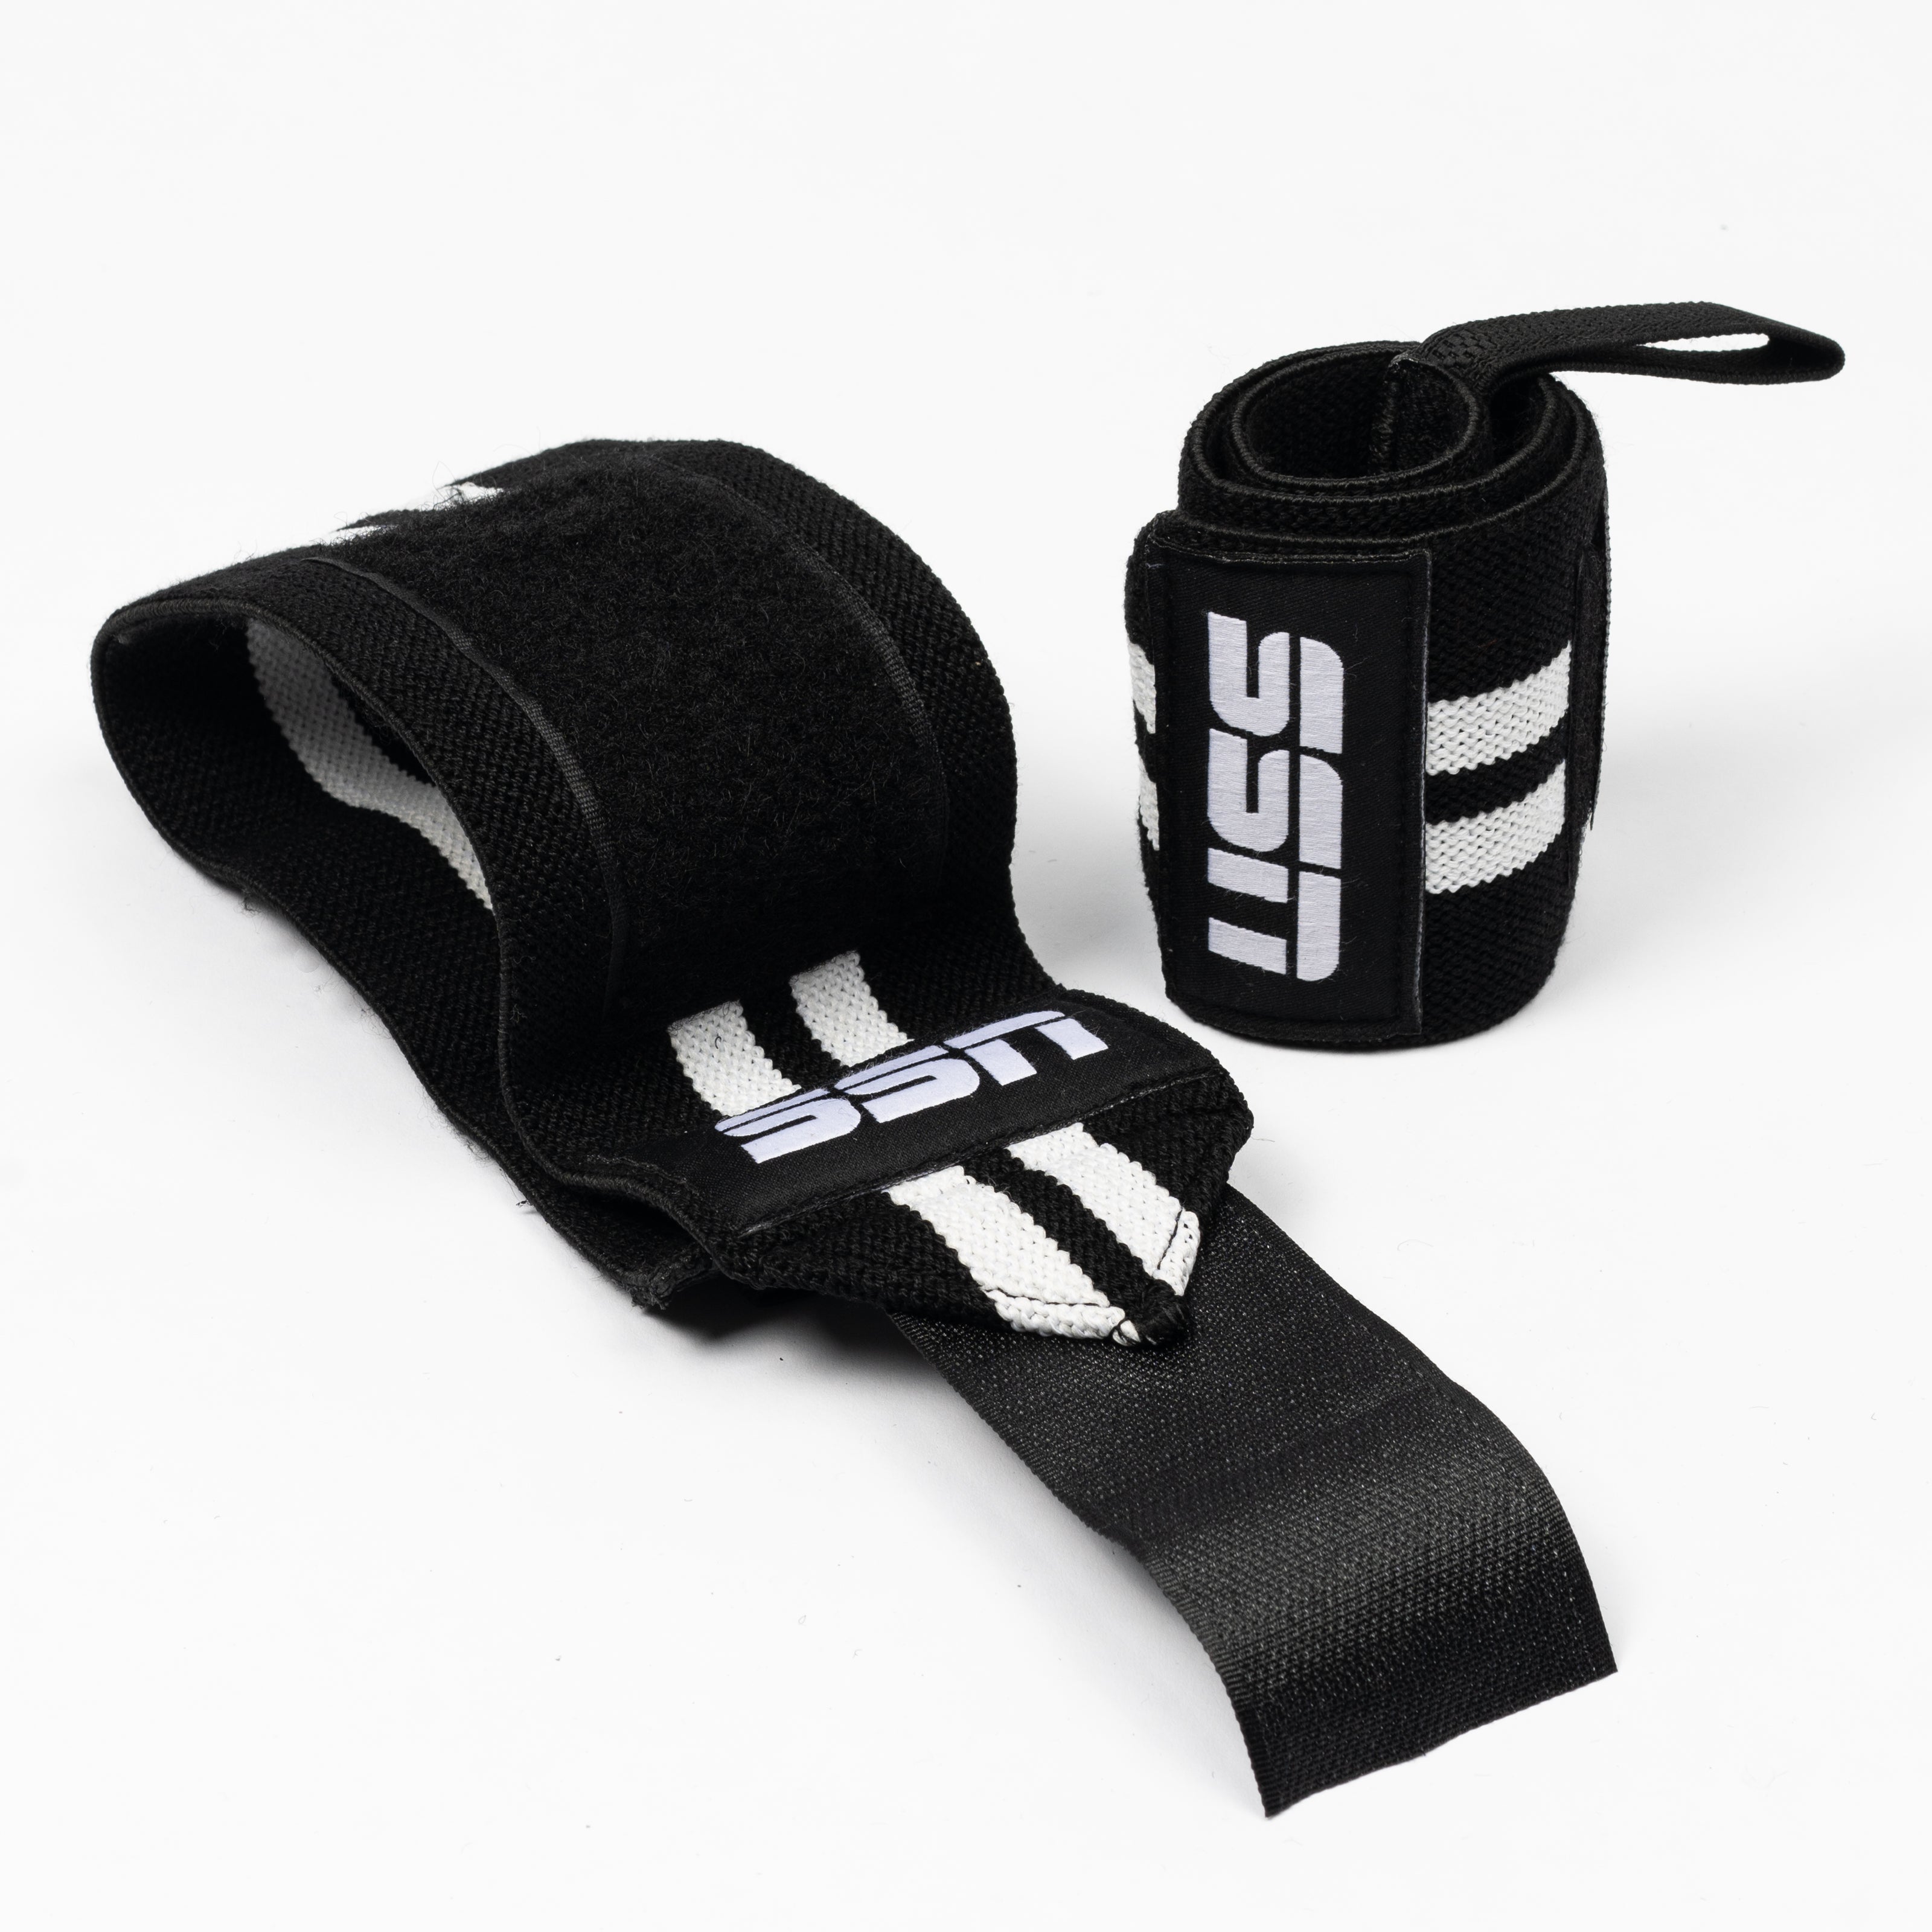 Lifting Wrist Straps for Weightlifting -Weight Lifting Wrist Wraps